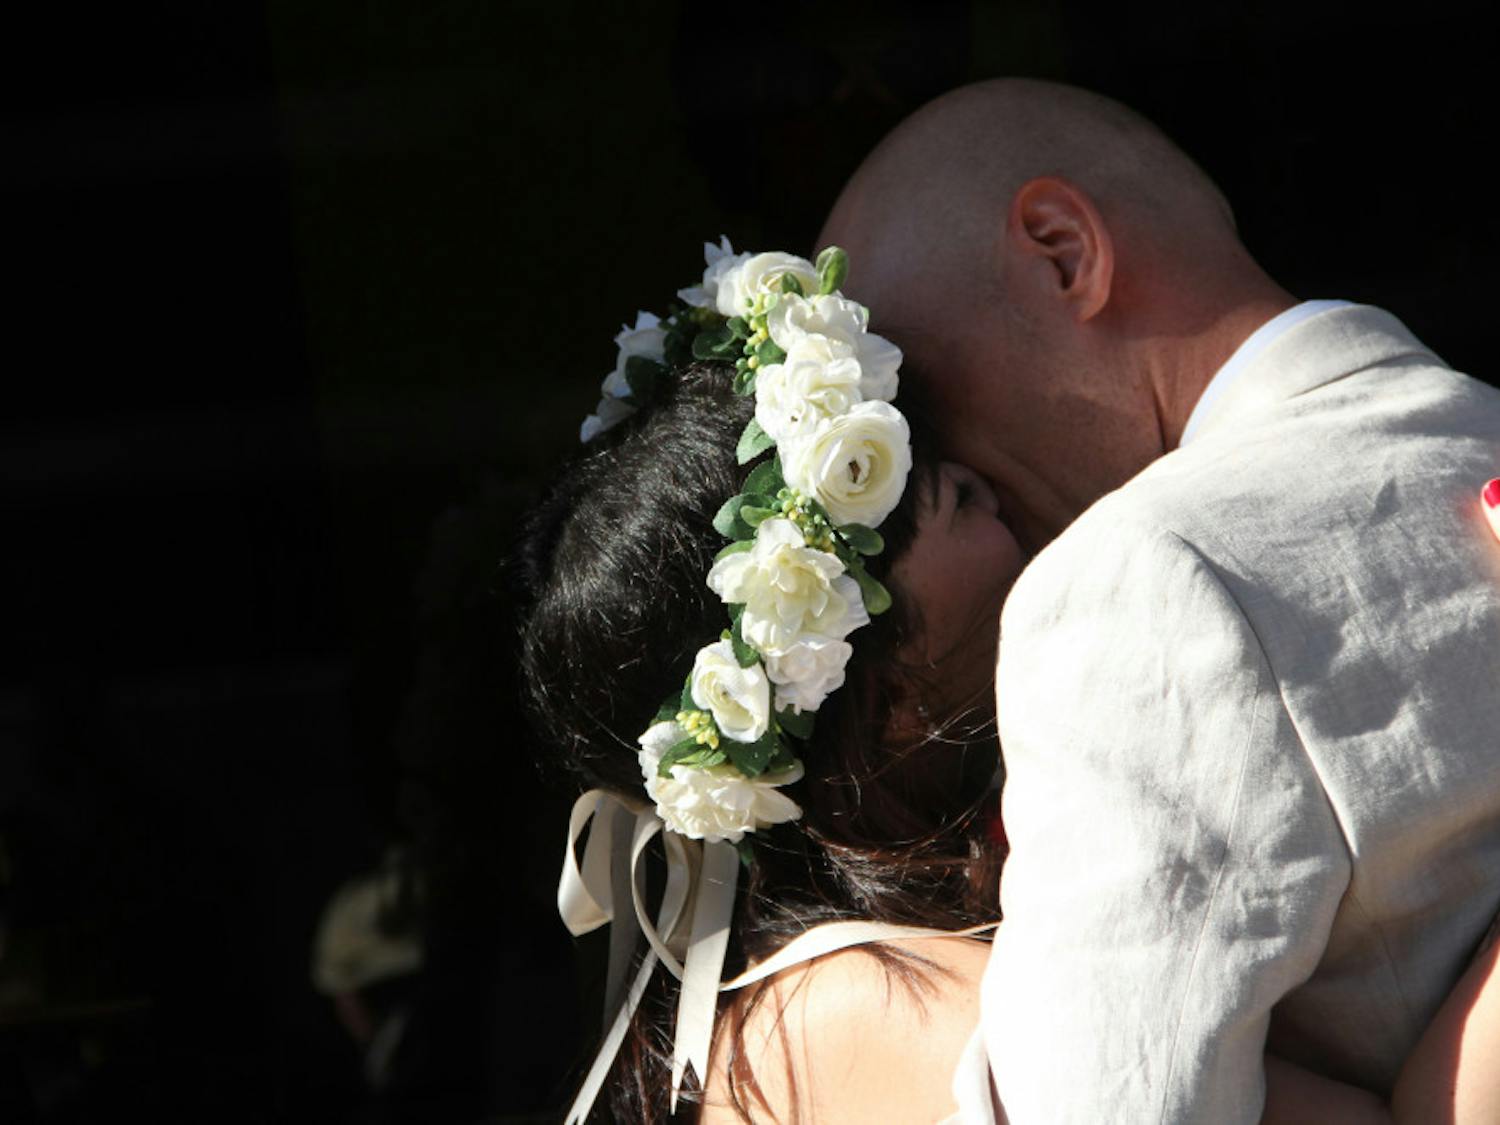 Dina Benbrahim and Kari Thorleifsson seal their marriage with a kiss at the Clerk of Court’s office Wednesday evening. 